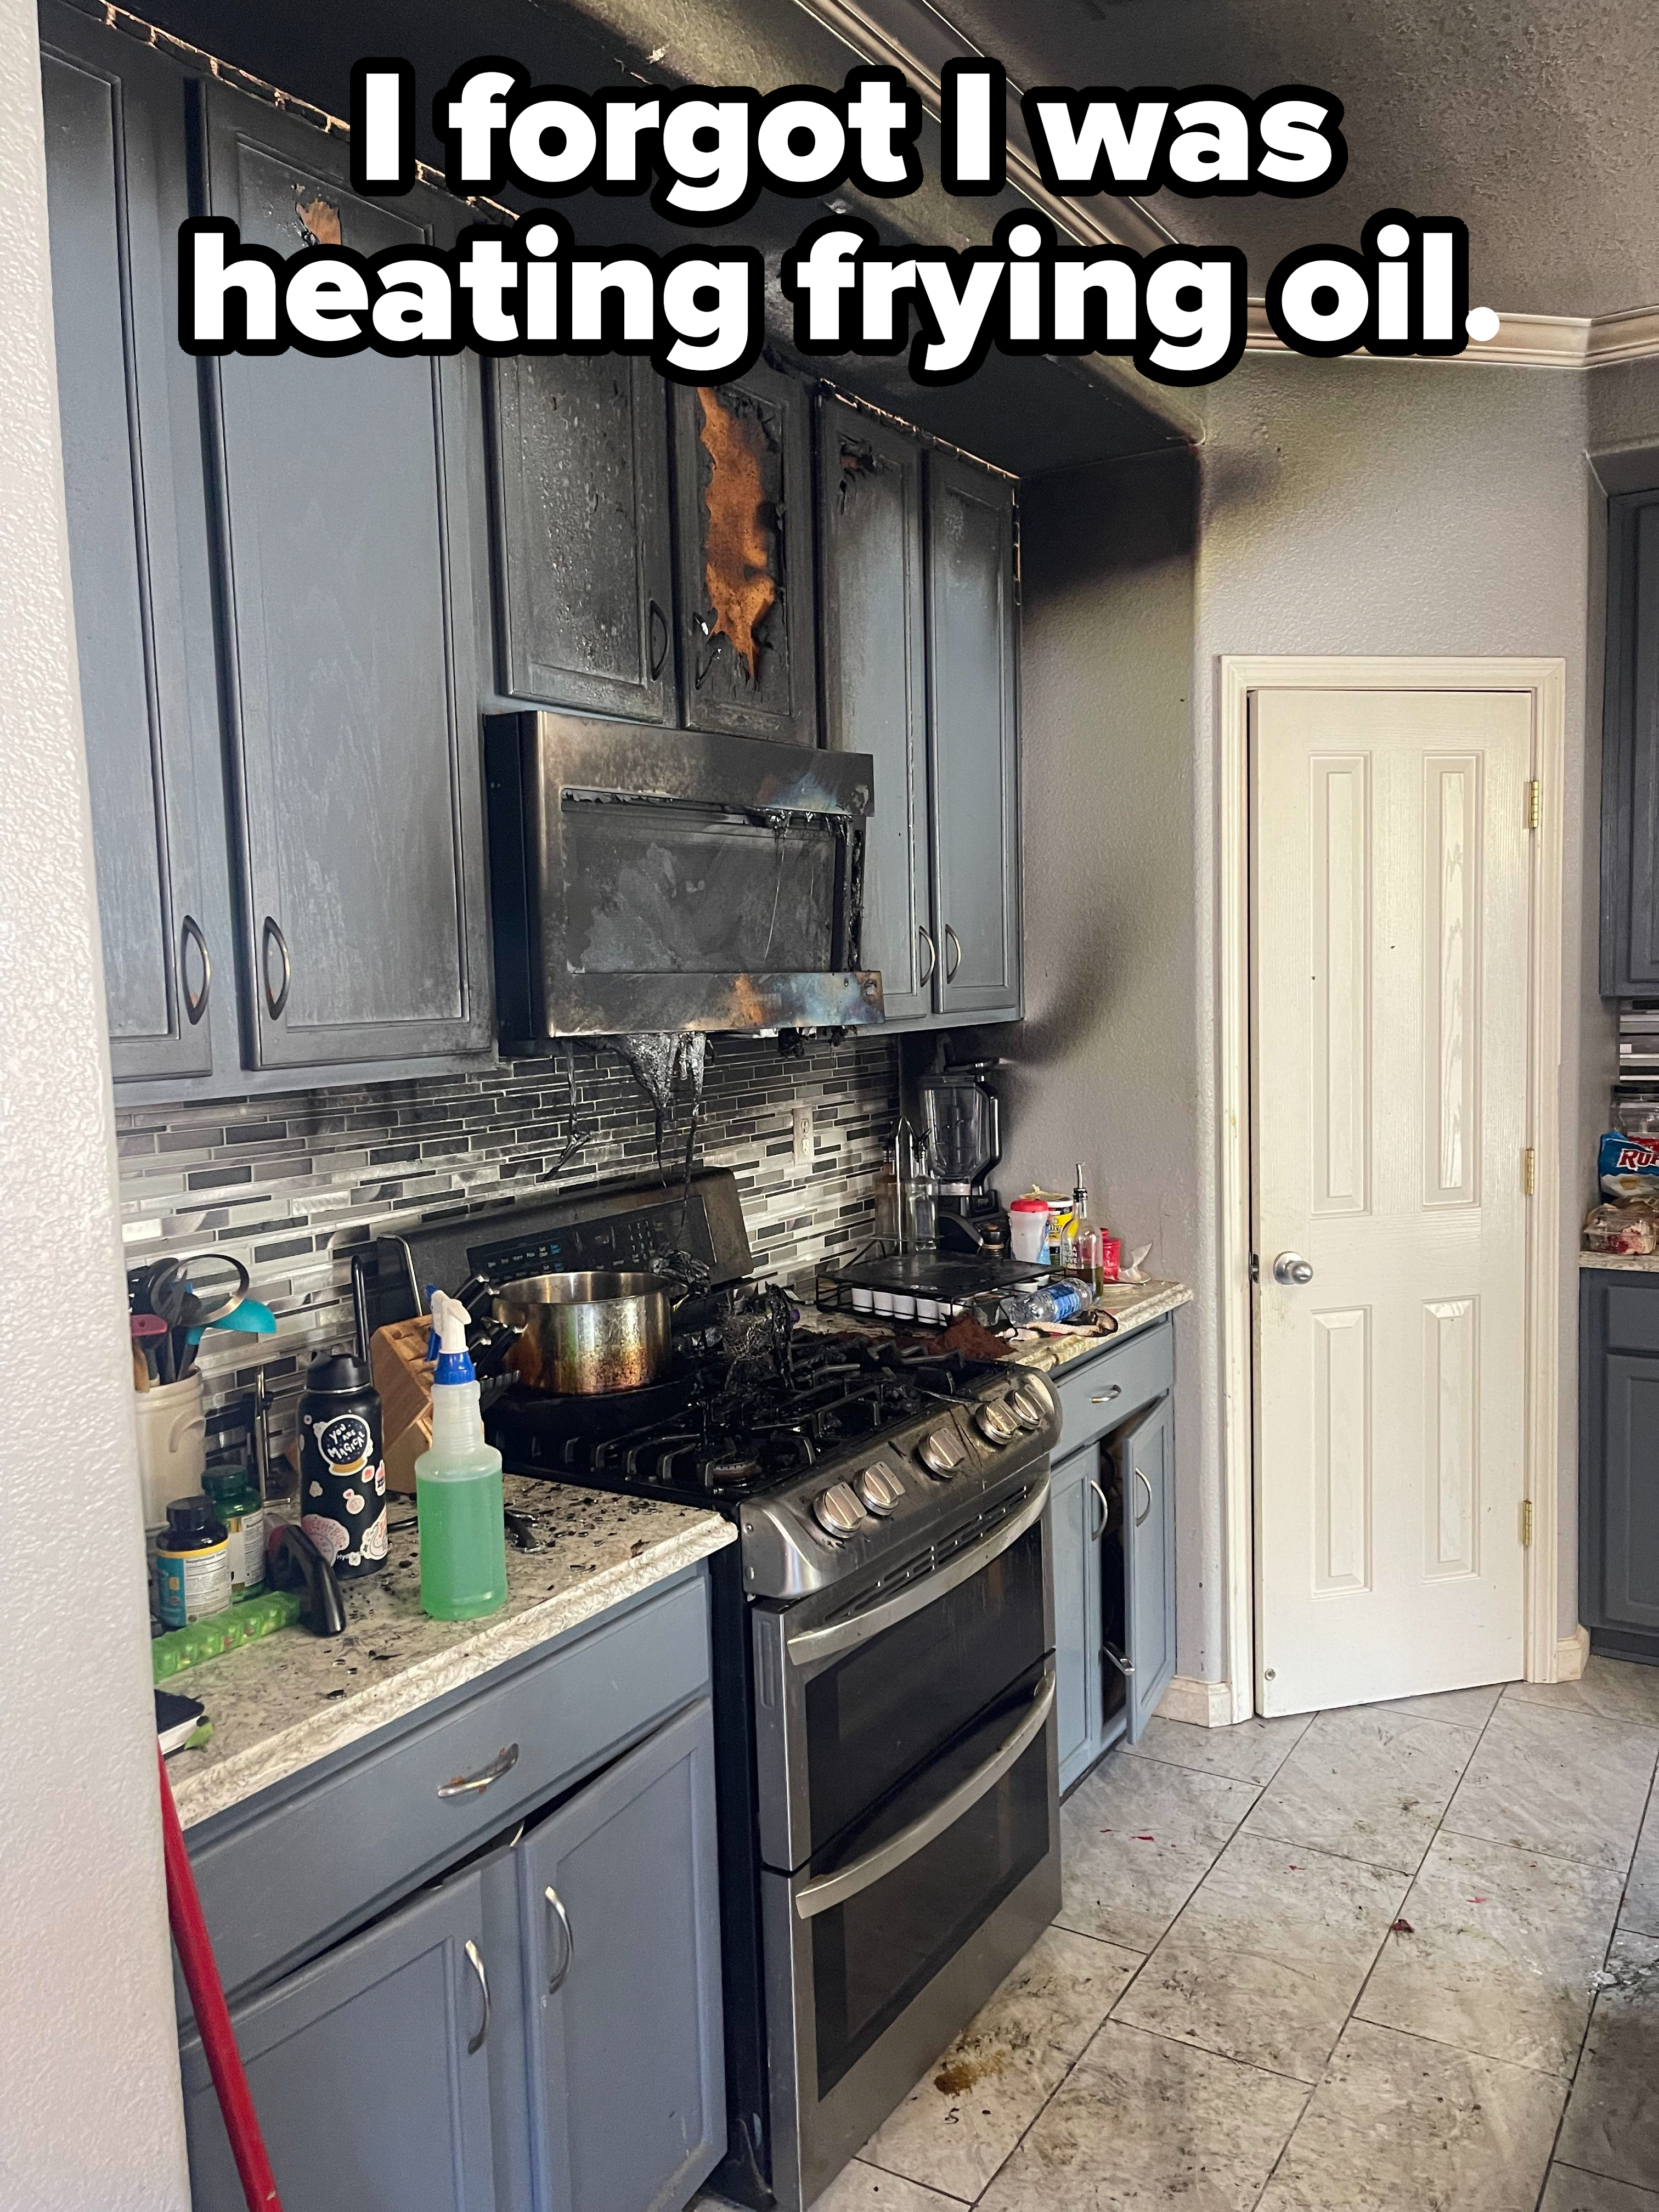 Kitchen after a fire with extensive damage to cabinets and walls; burnt cookware on the stove, with caption: &quot;I forgot I was heating frying oil&quot;